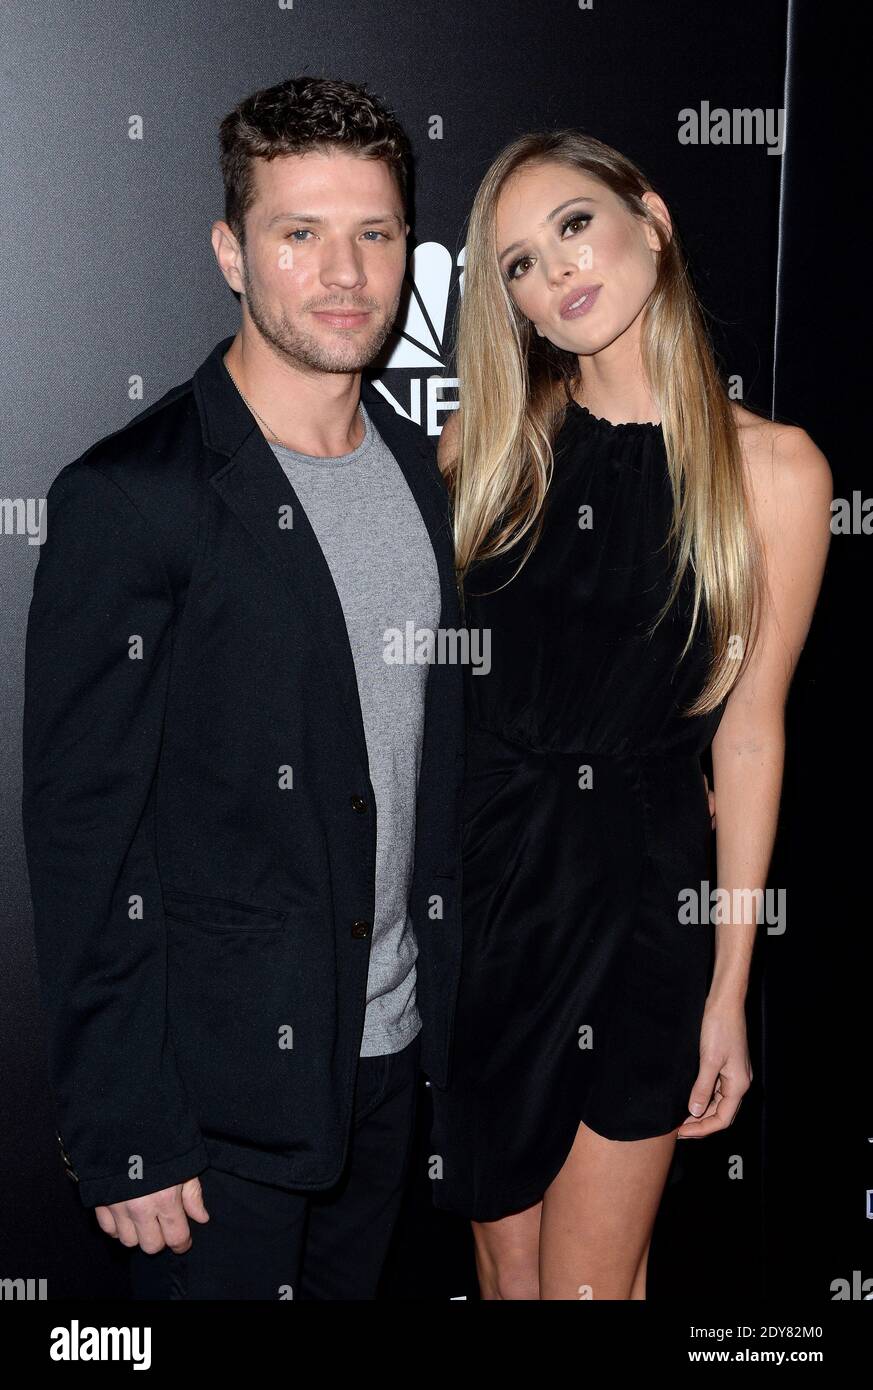 Ryan Phillippe and Paulina Slagter attend the People Magazine Awards at The Beverly Hilton Hotel in Beverly Hills, Los Angeles, CA, USA, on December 18, 2014. Photo by Lionel Hahn/ABACAPRESS.COM Stock Photo